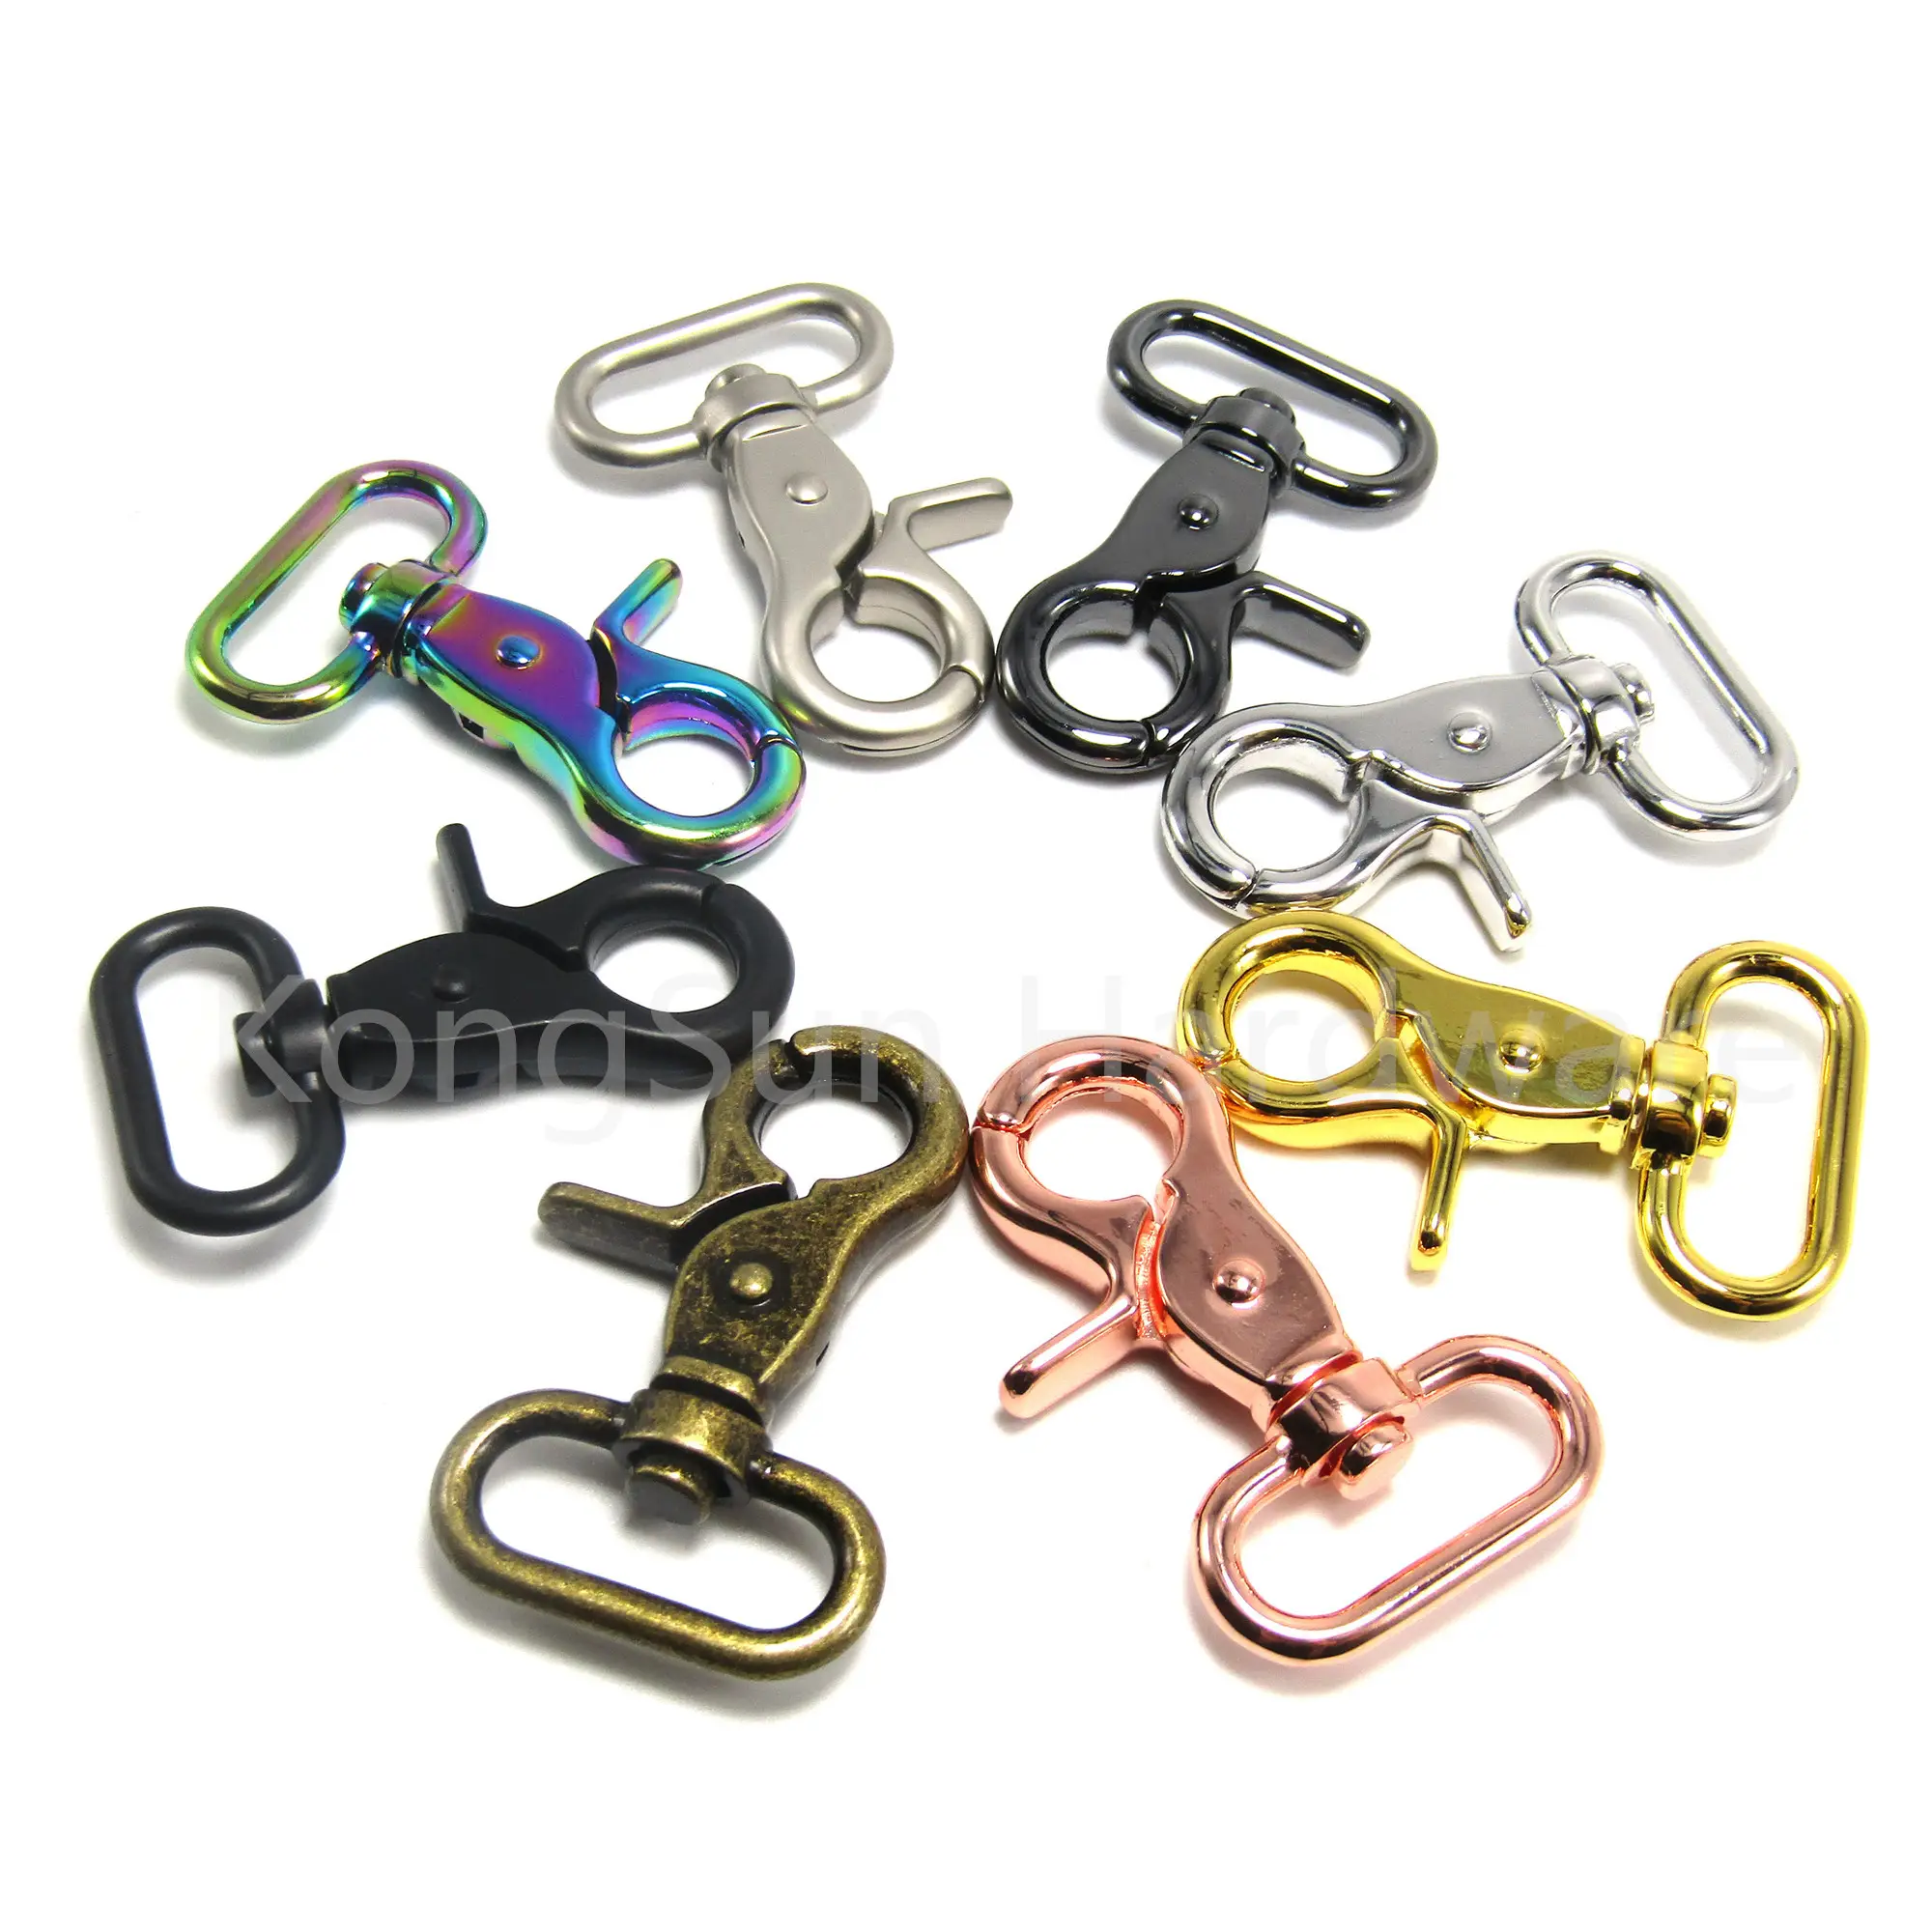 1 inch strap ANTIQUE BRASS Trigger Snap Hook For Bag Purse and Craft Making Lobster Swivel Clasps